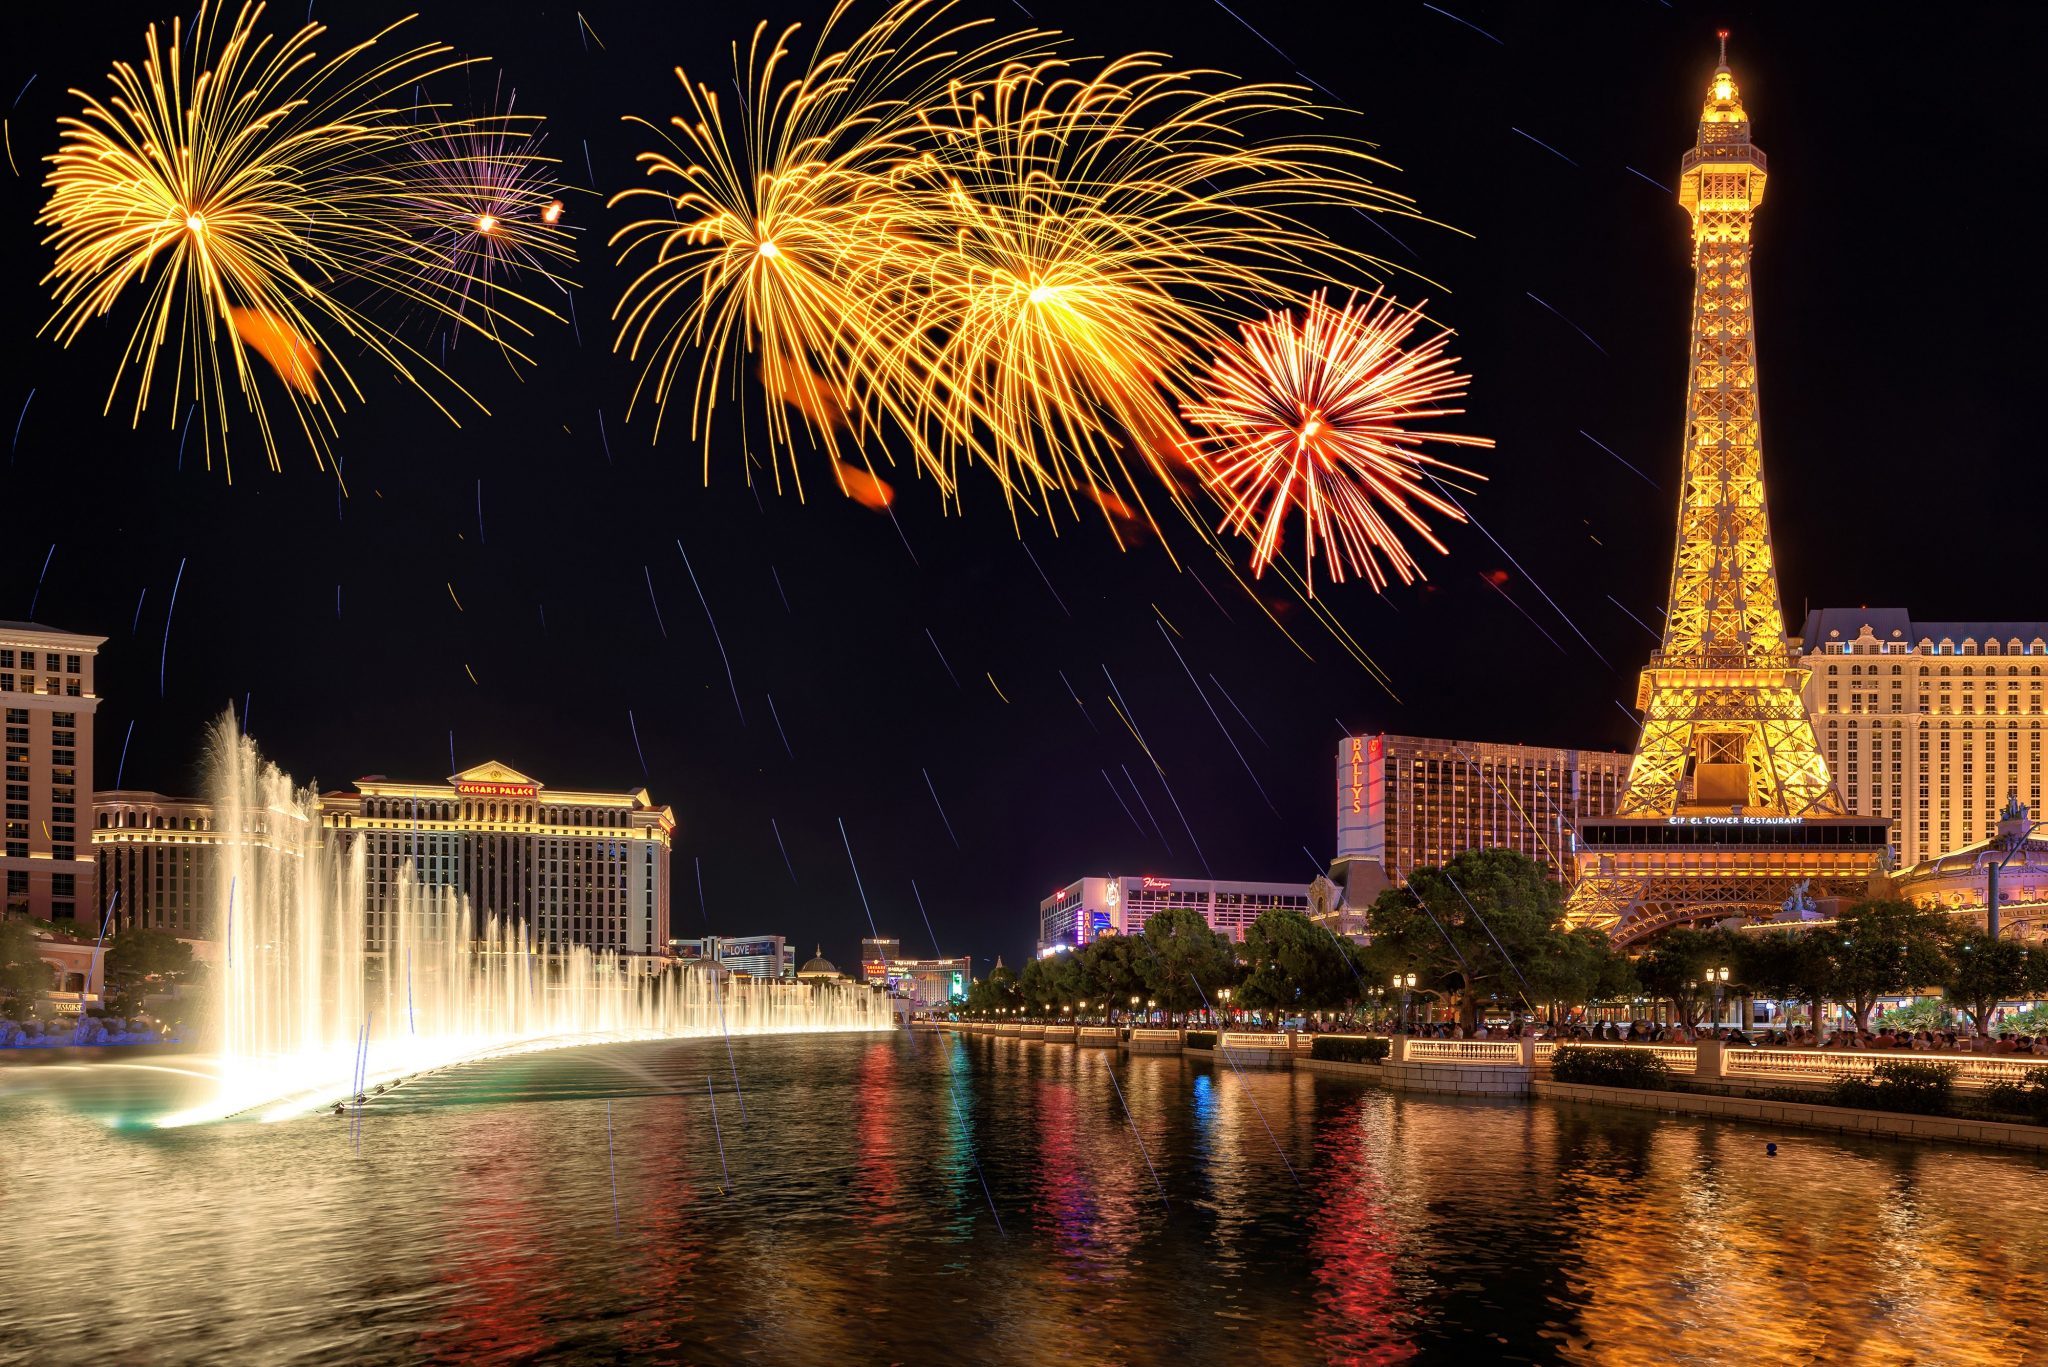 red rock casino fireworks 2019 cancelled